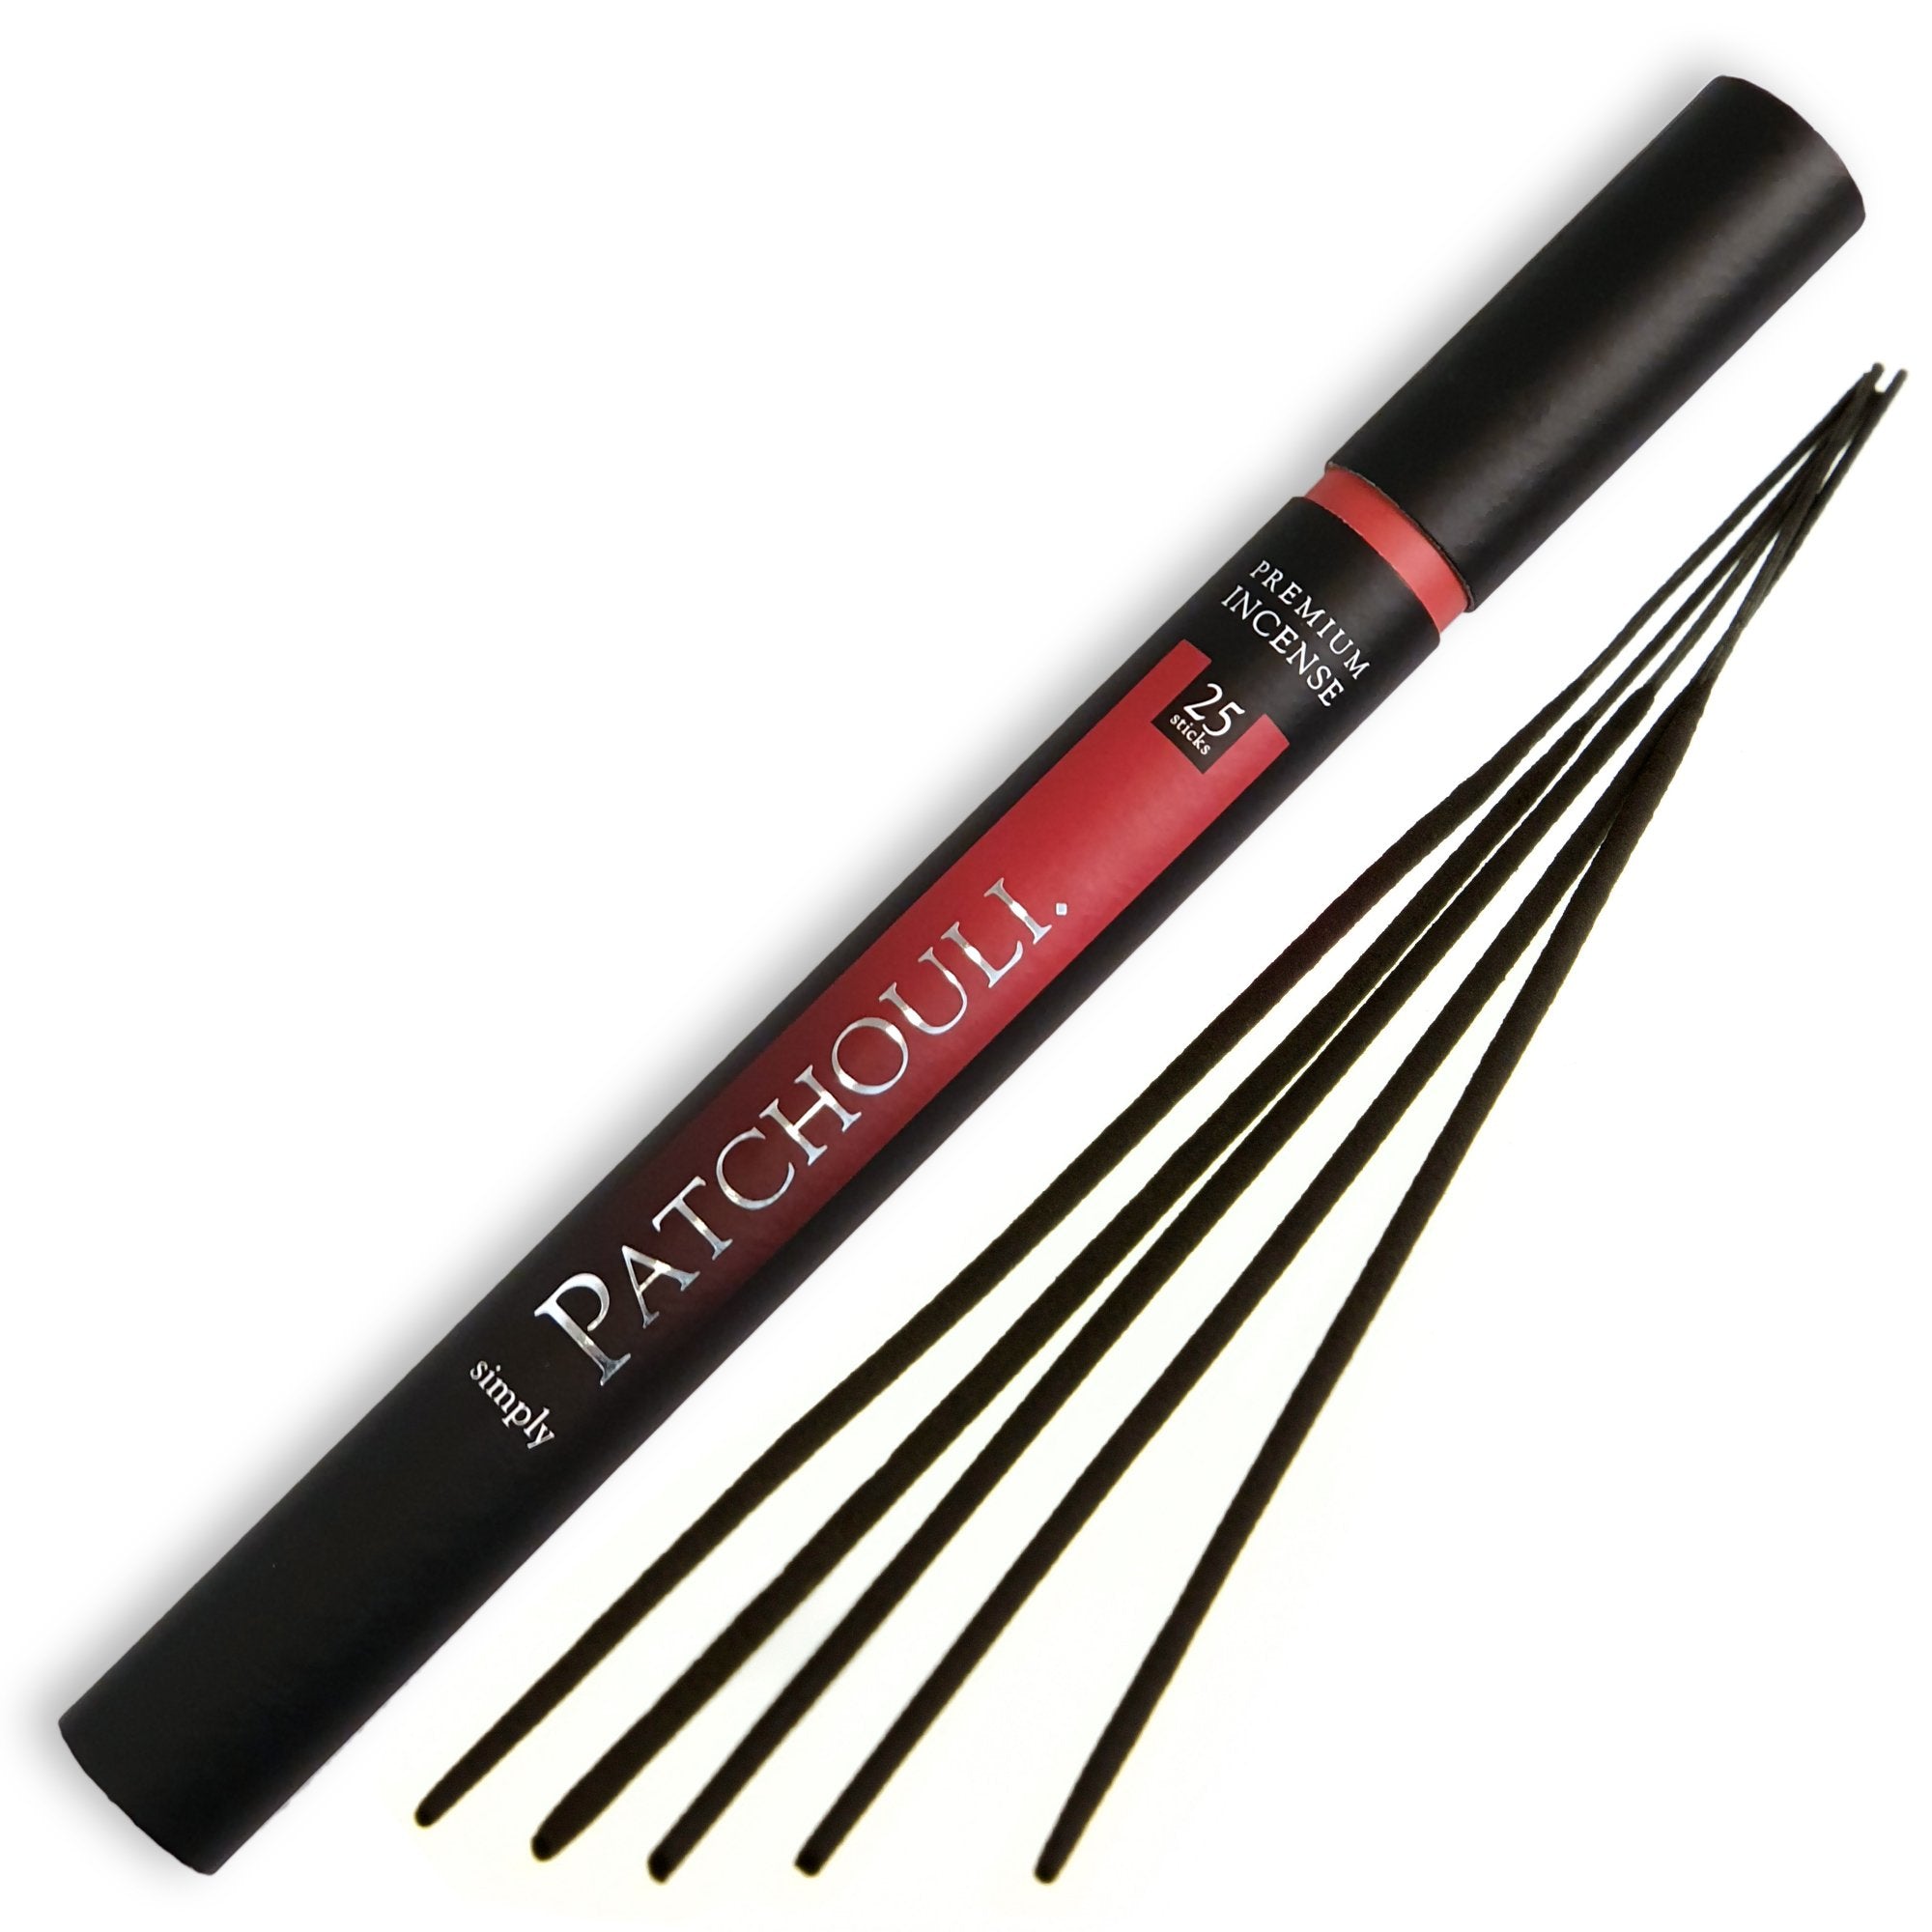 Patchouli Incense - The Spirit of Life